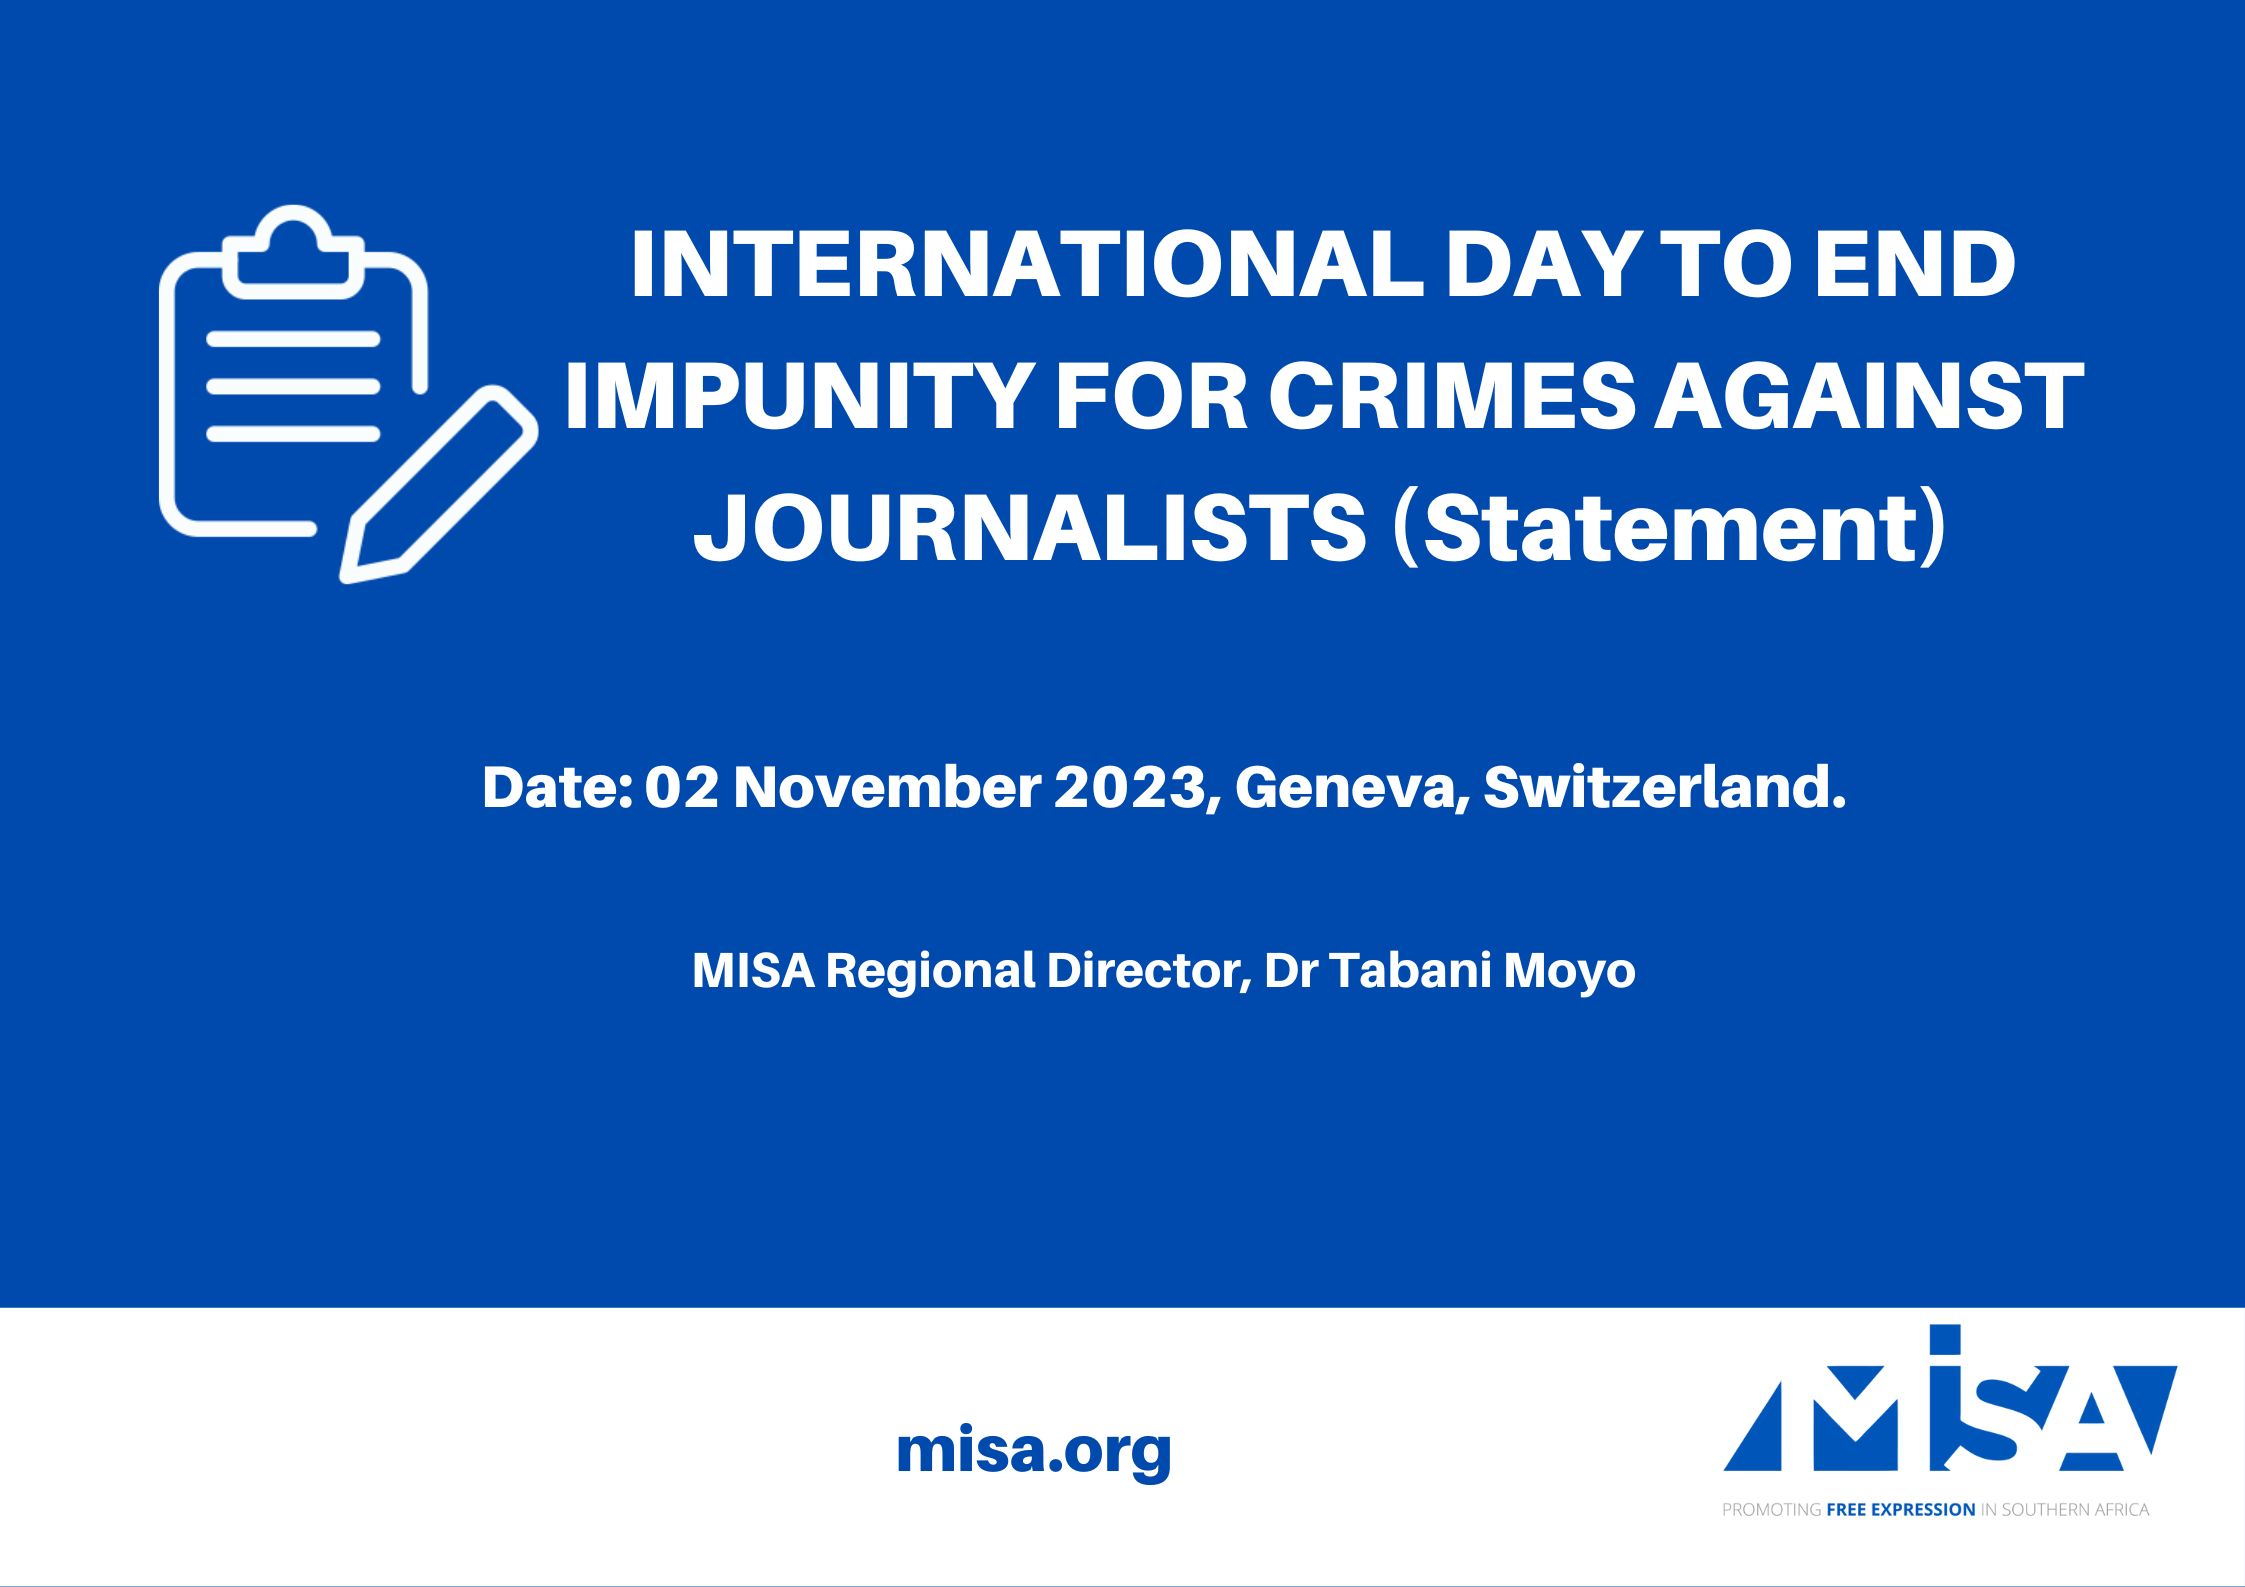 INTERNATIONAL DAY TO END IMPUNITY FOR CRIMES AGAINST JOURNALISTS (Statement)